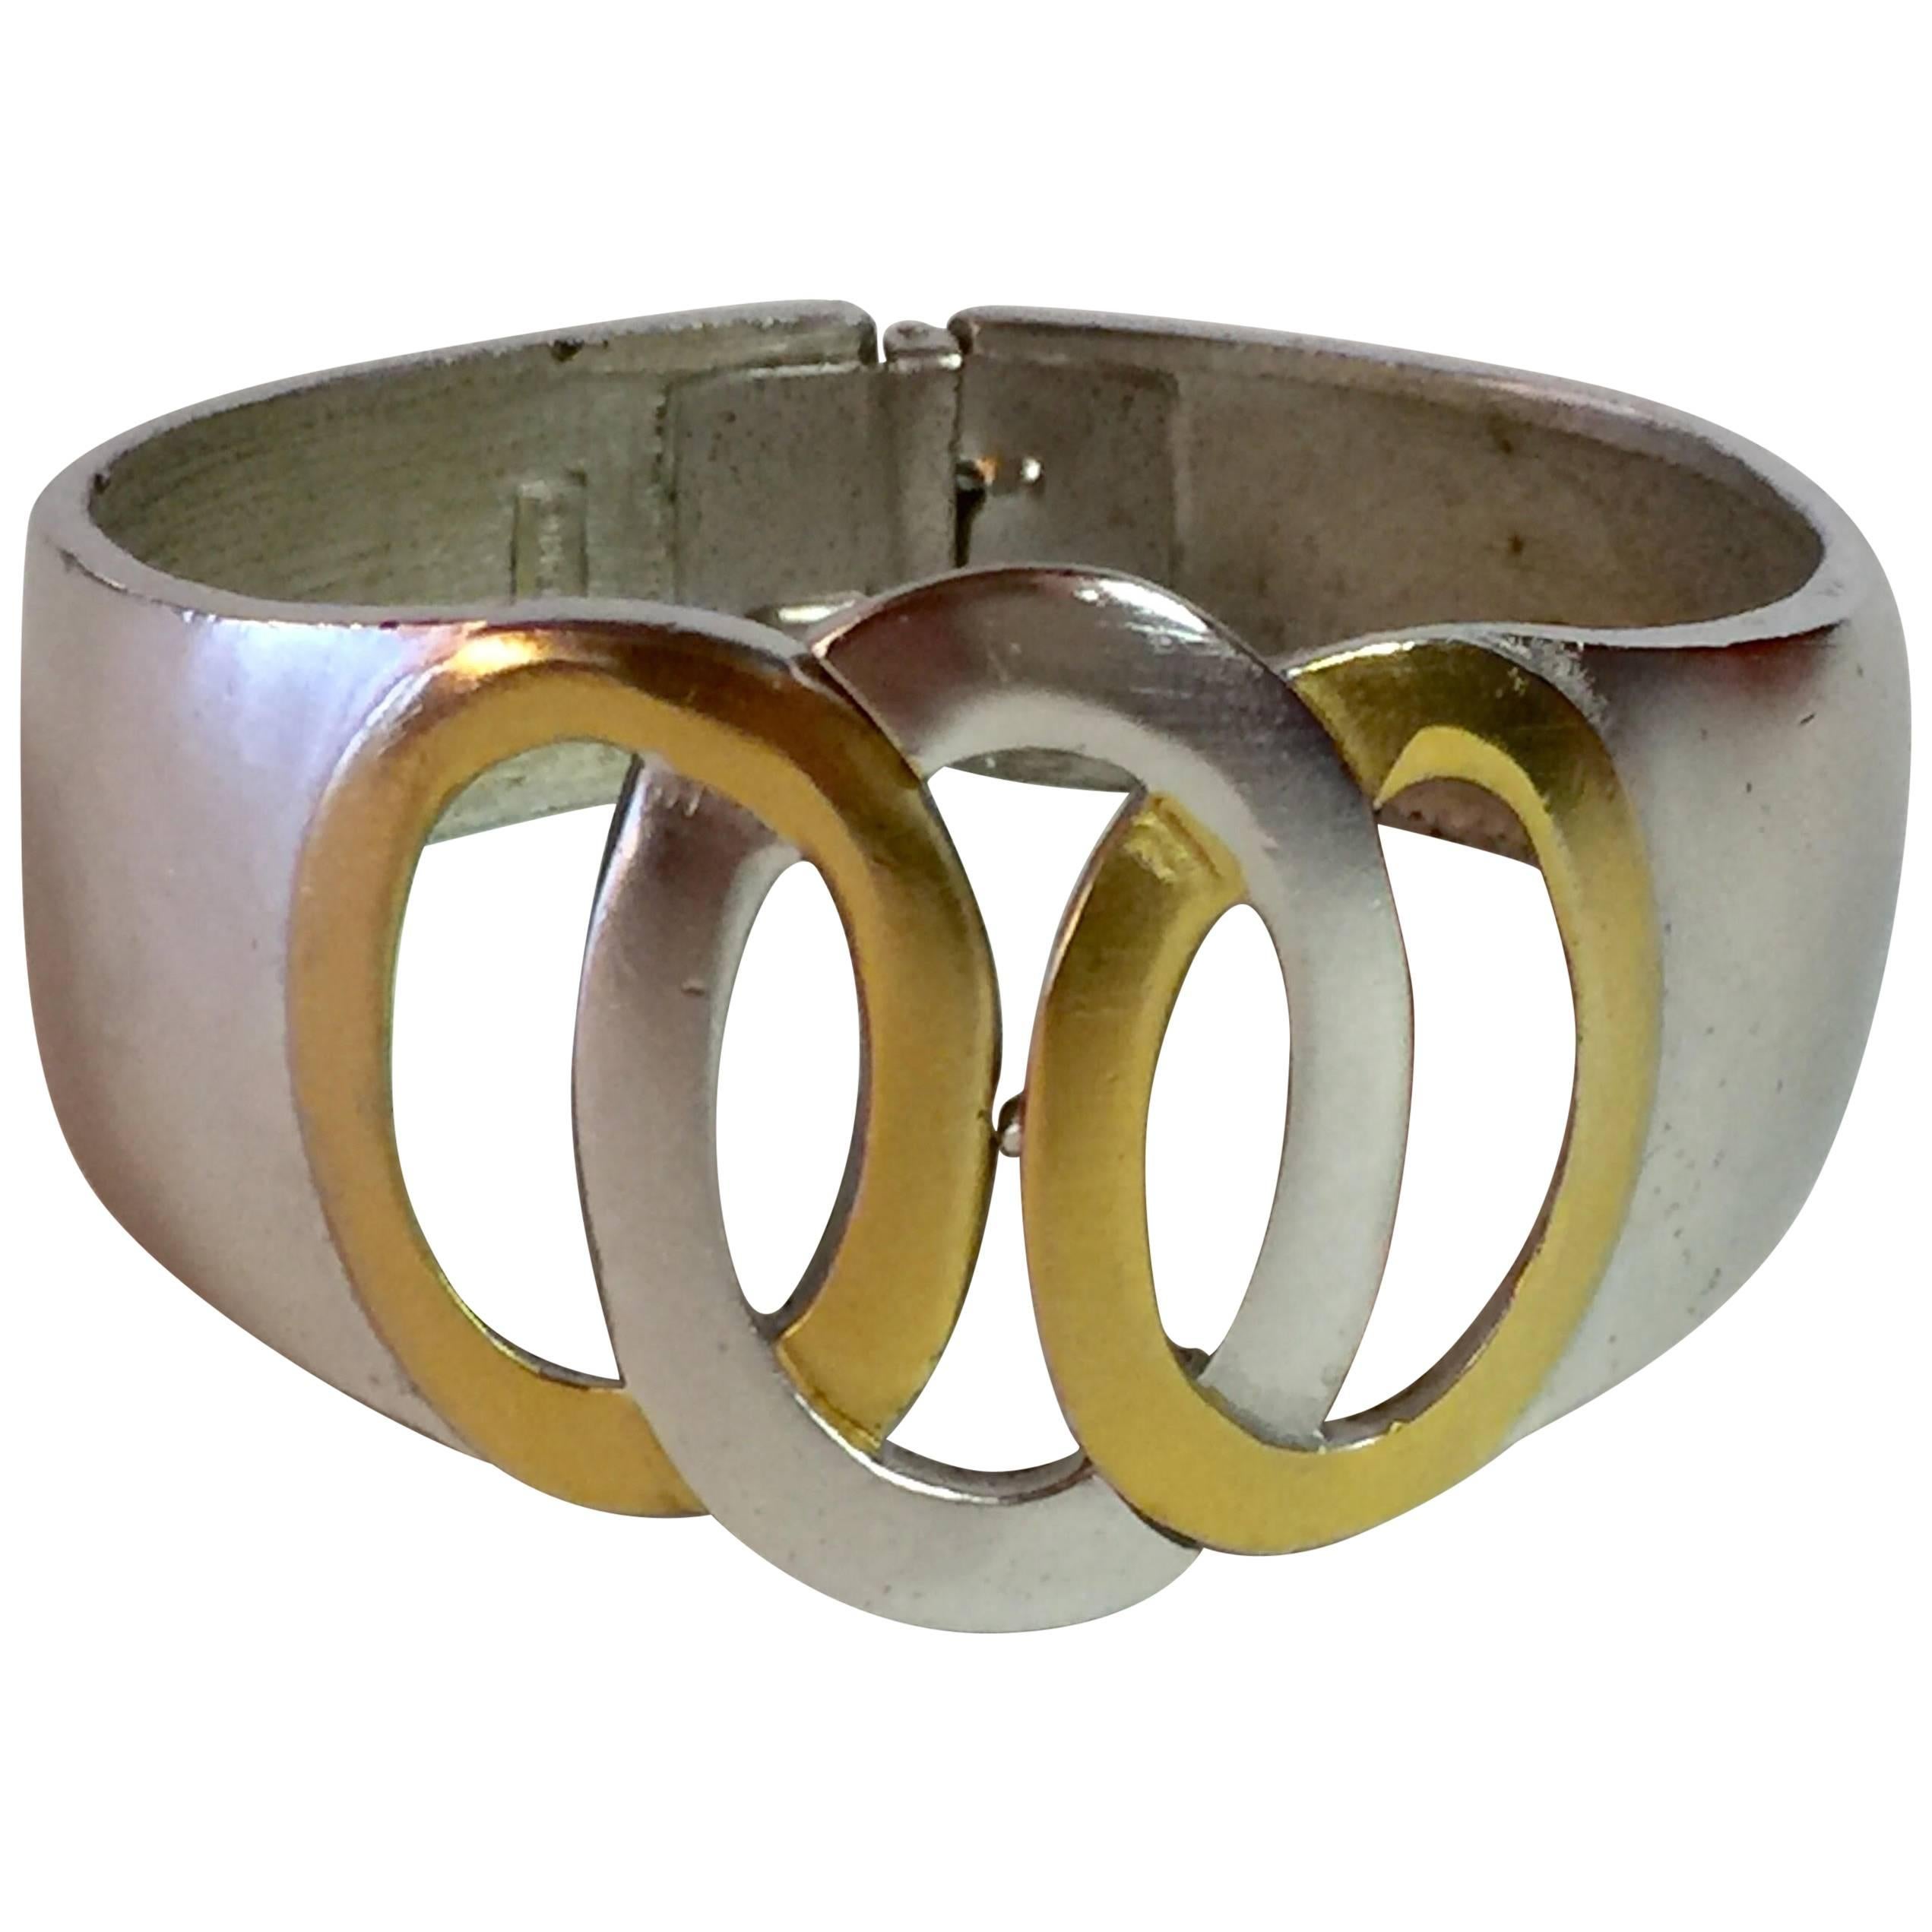 Kunio Matsumoto 1960s TRIFARI Mixed Metals Silver and Goldtone Hinged Bracelet For Sale